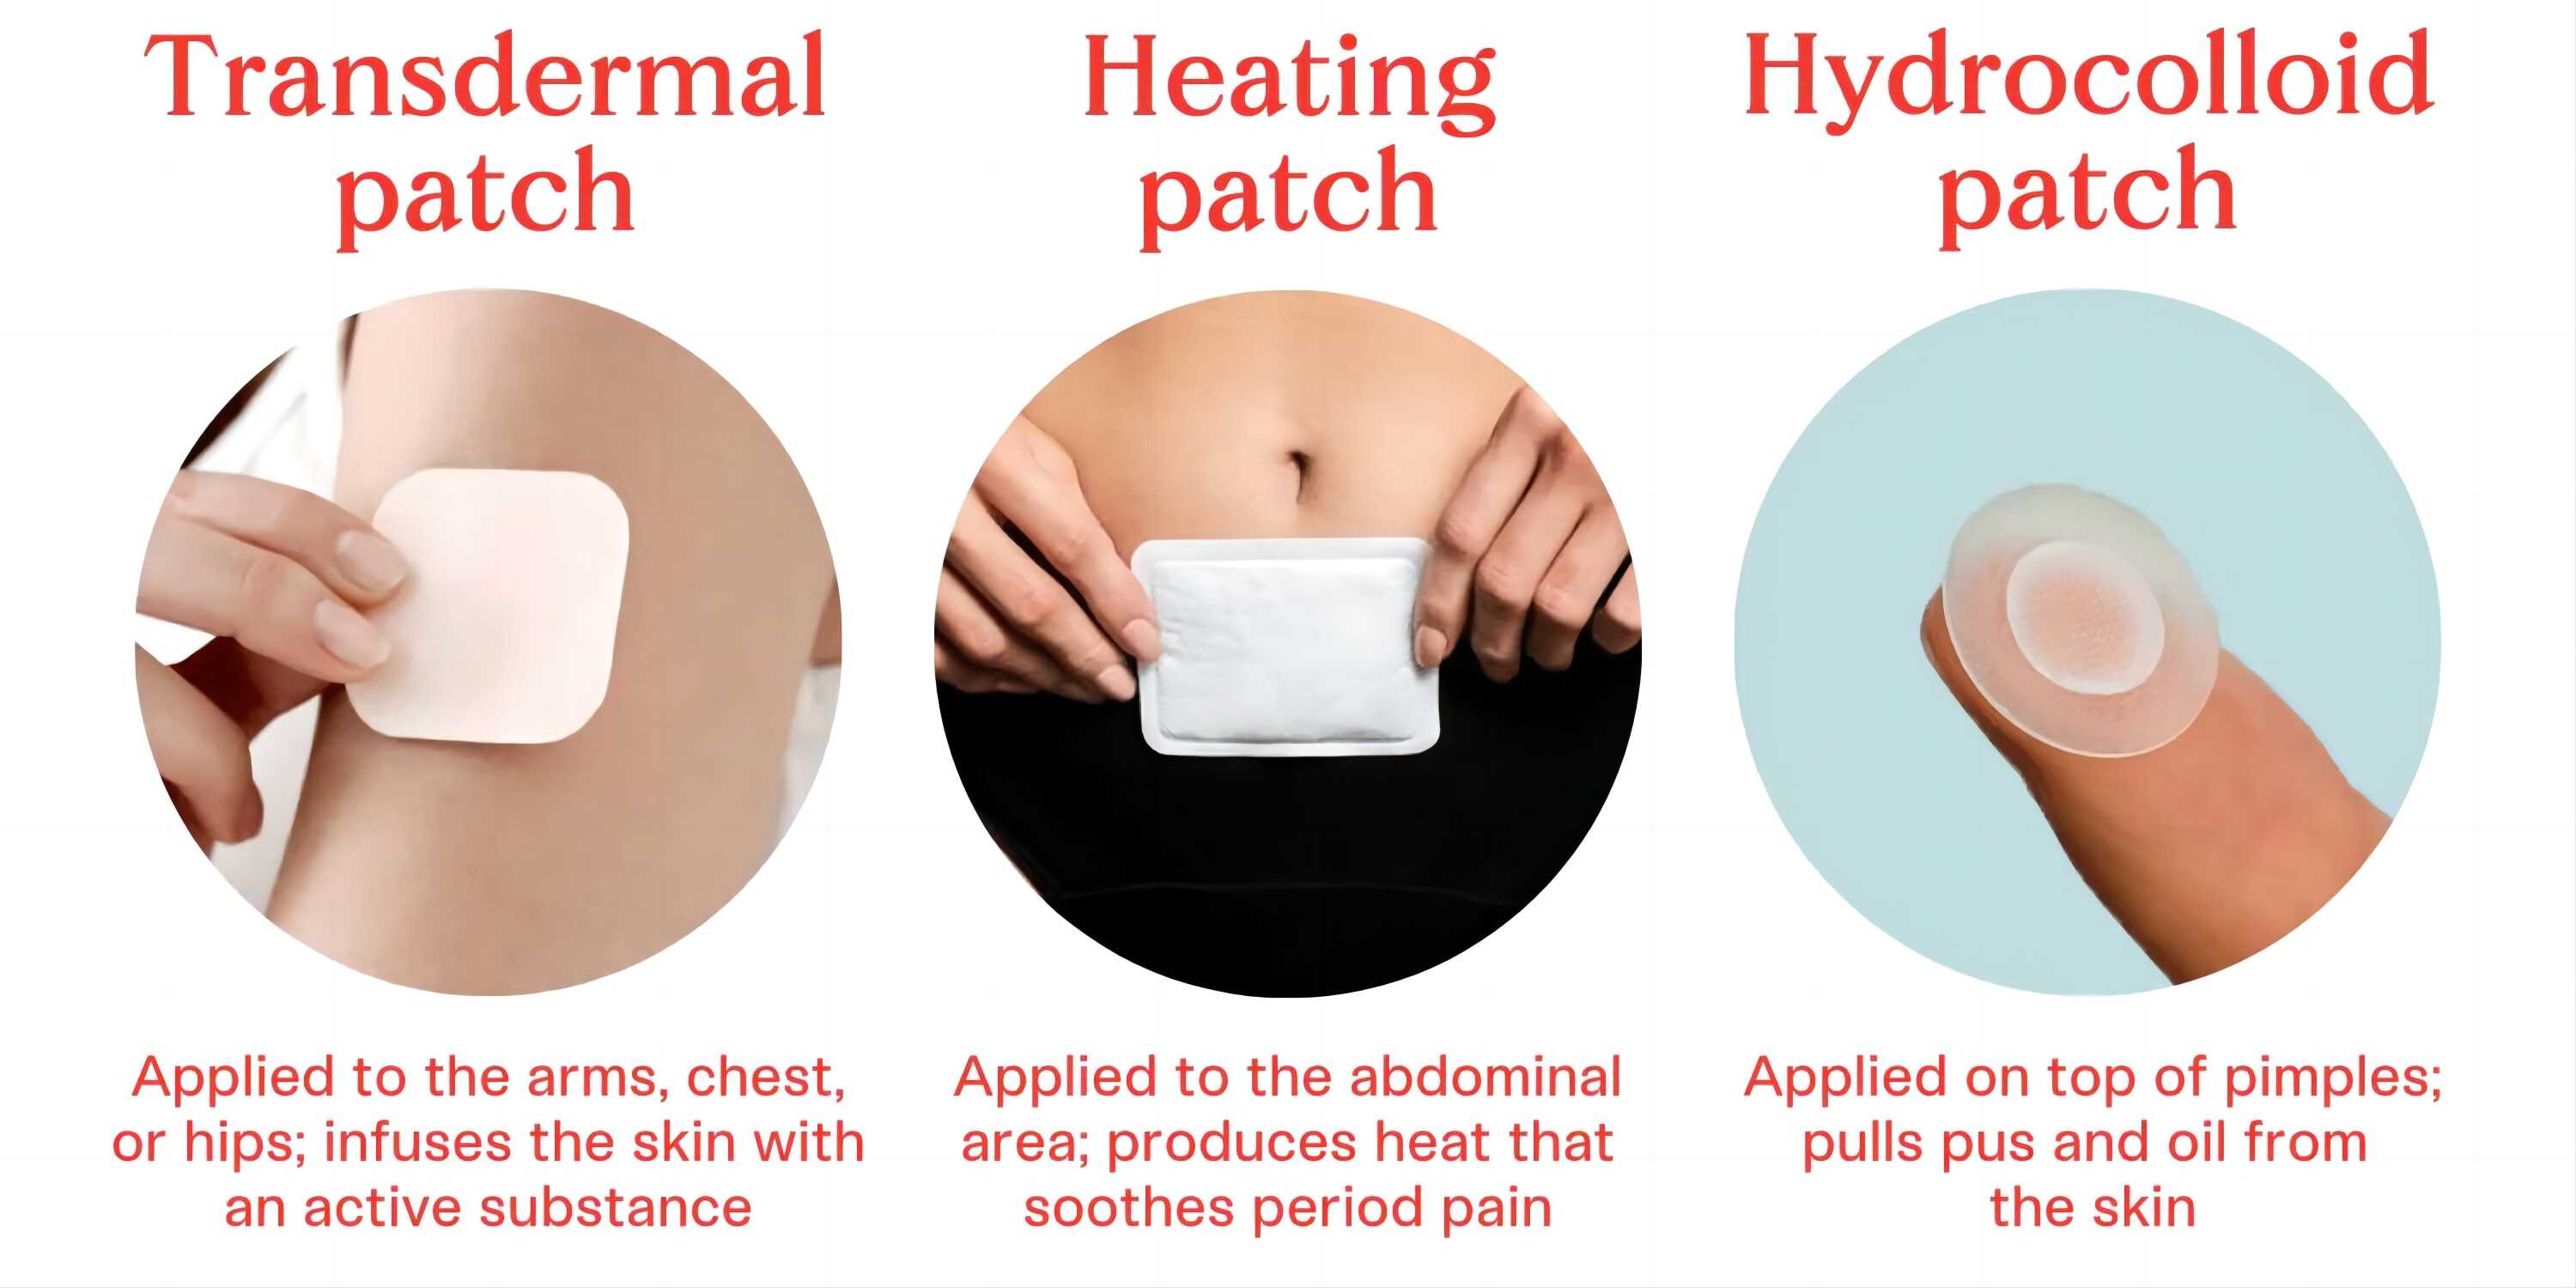 transdermal patches work for period pain.jpg